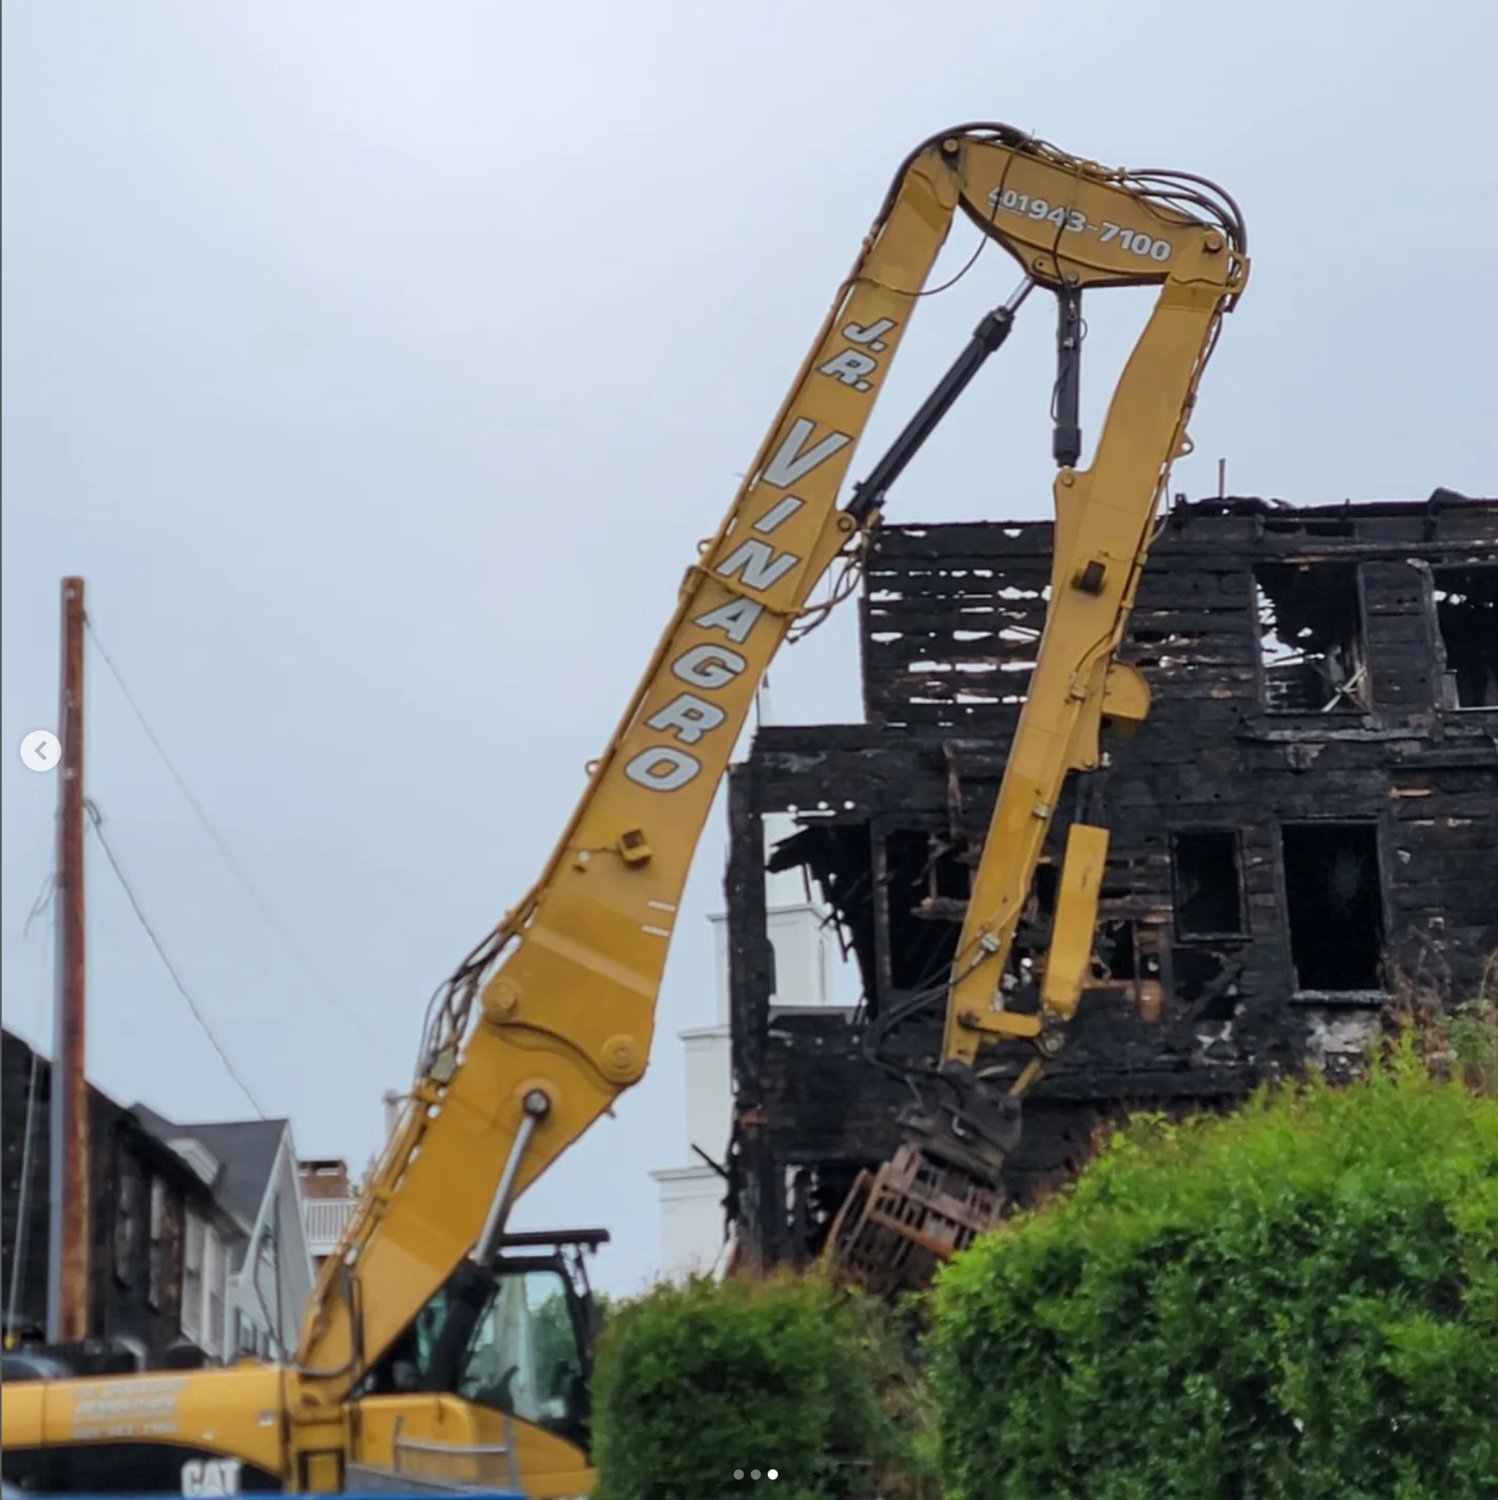 Demolition work on the Veranda House, destroyed by fire last month, began this morning.